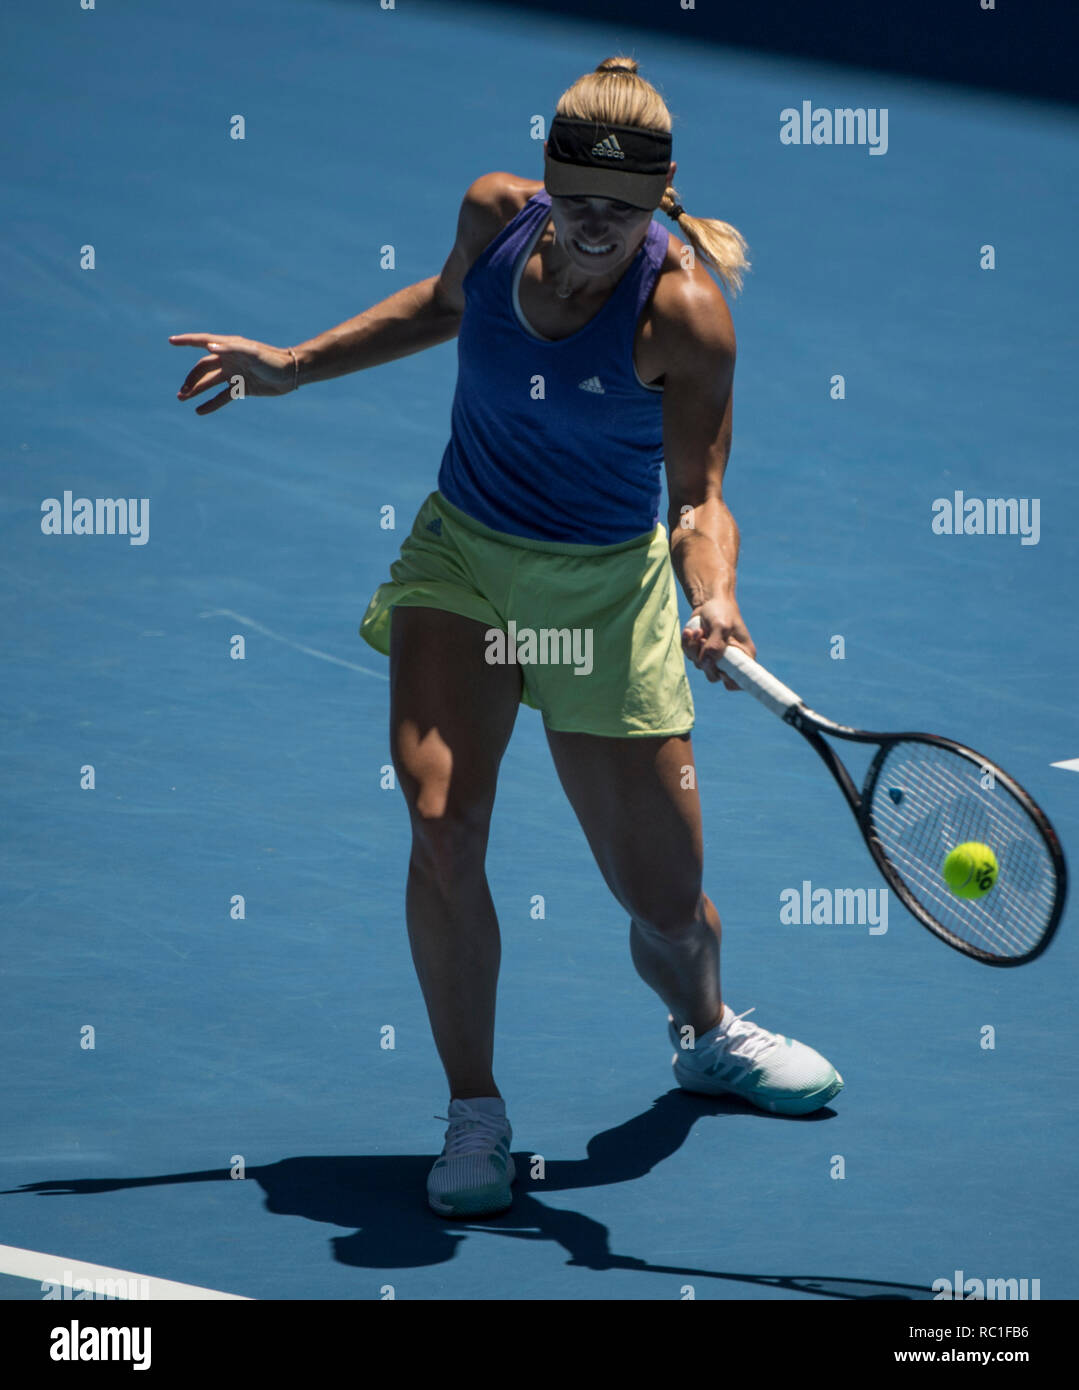 Melbourne, Australia. 13th Jan, 2019. Angelique Kerber of Germany attends a  training session ahead of the